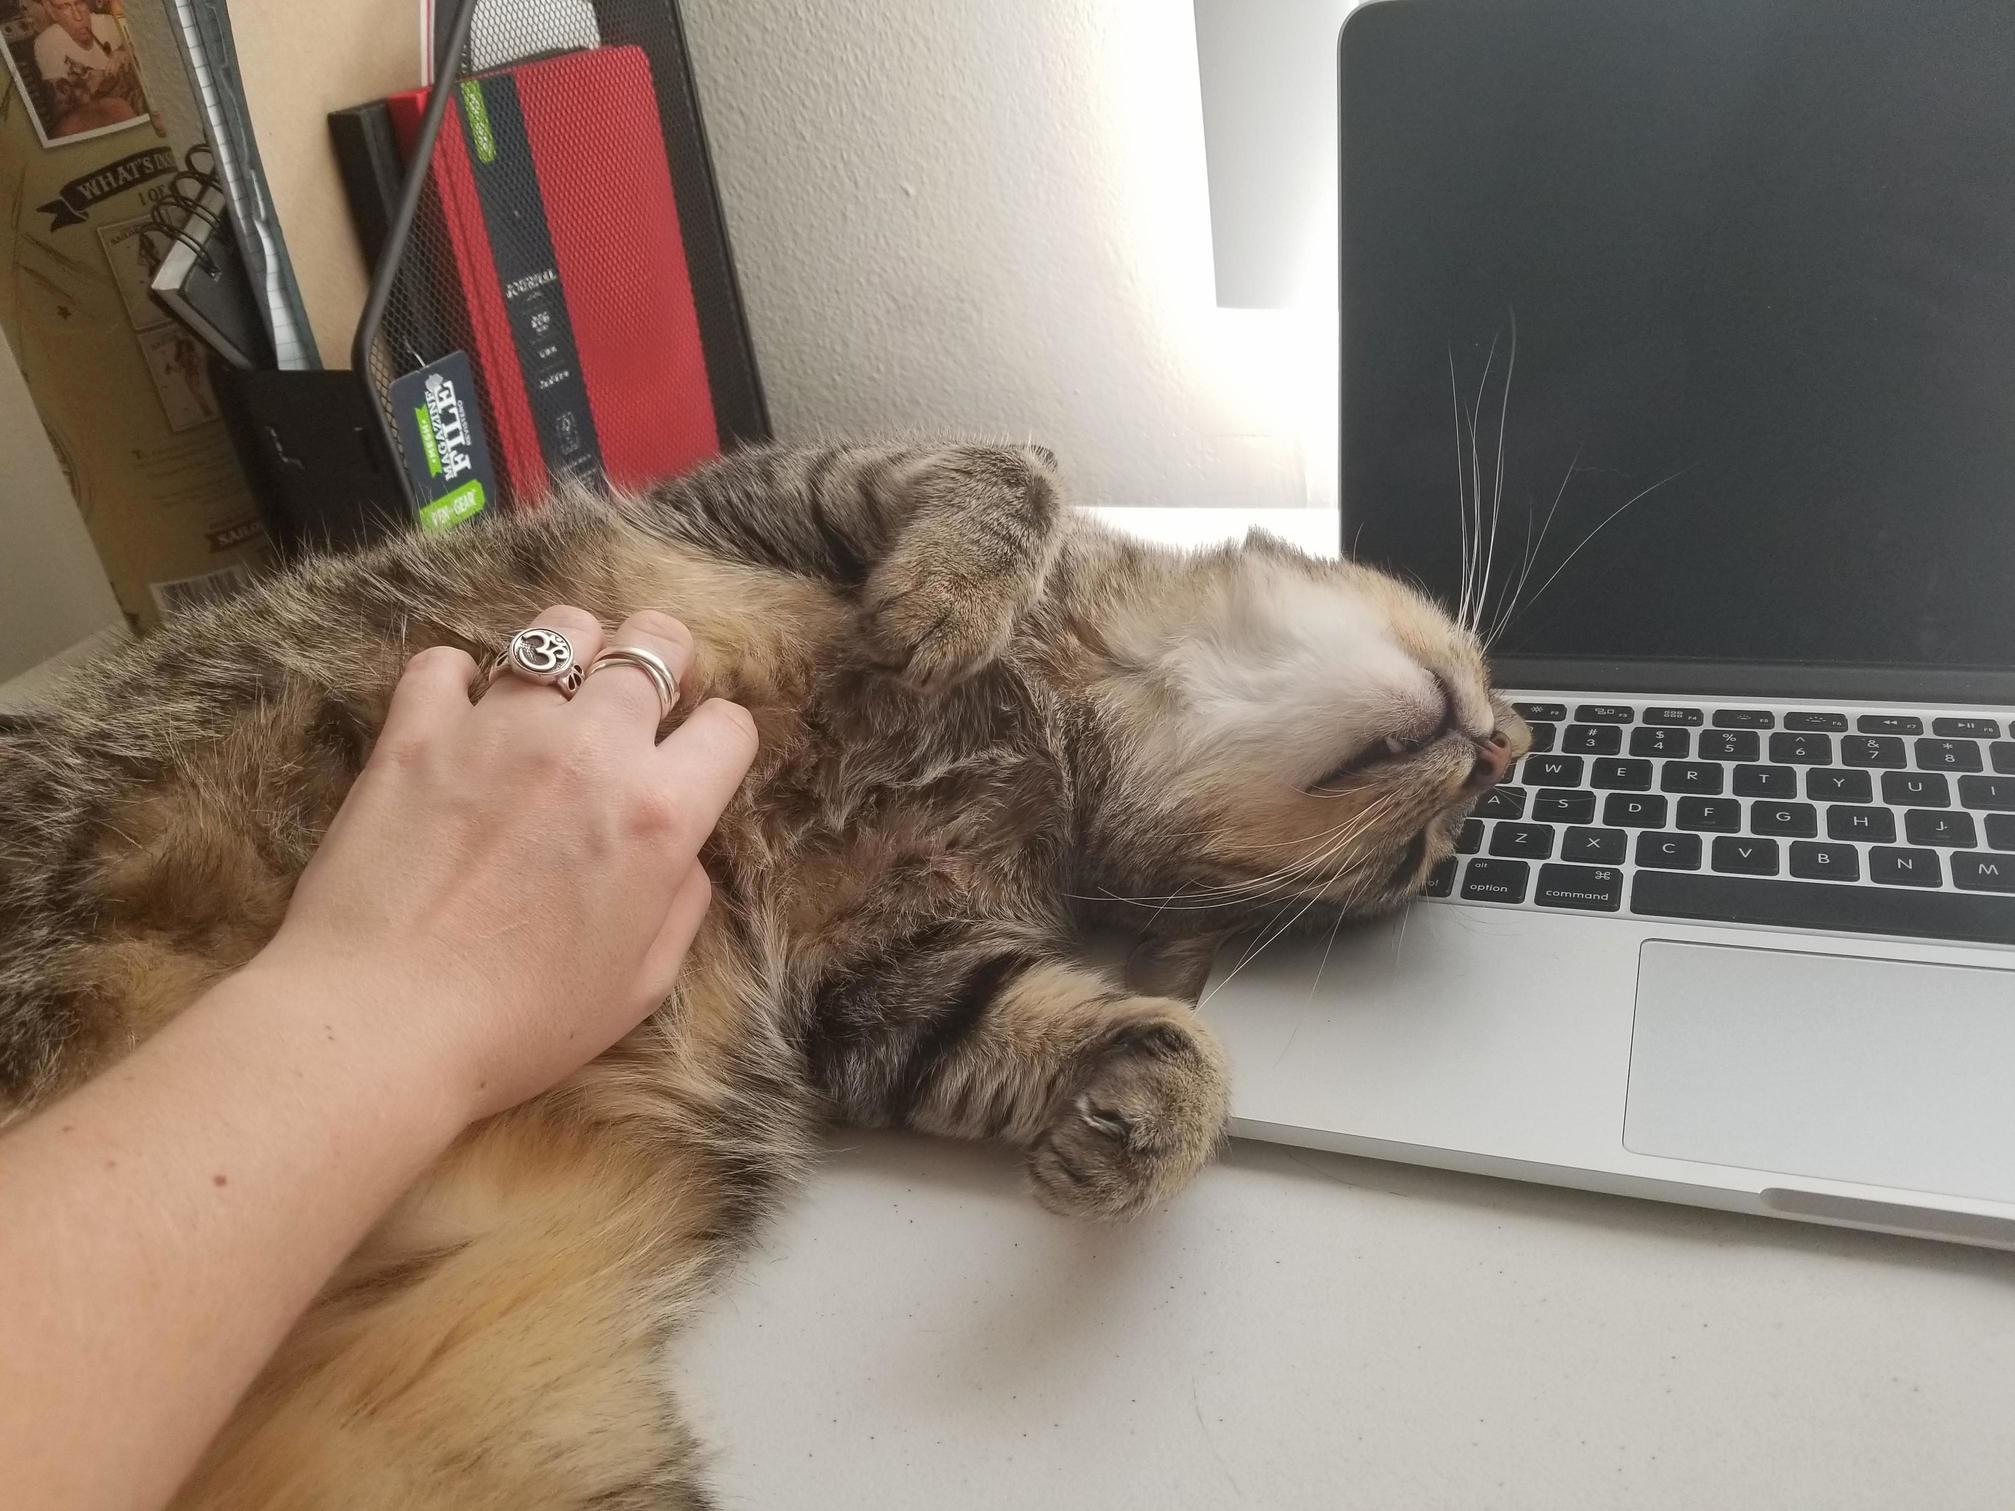 Hes finally comfortable with belly rubs!